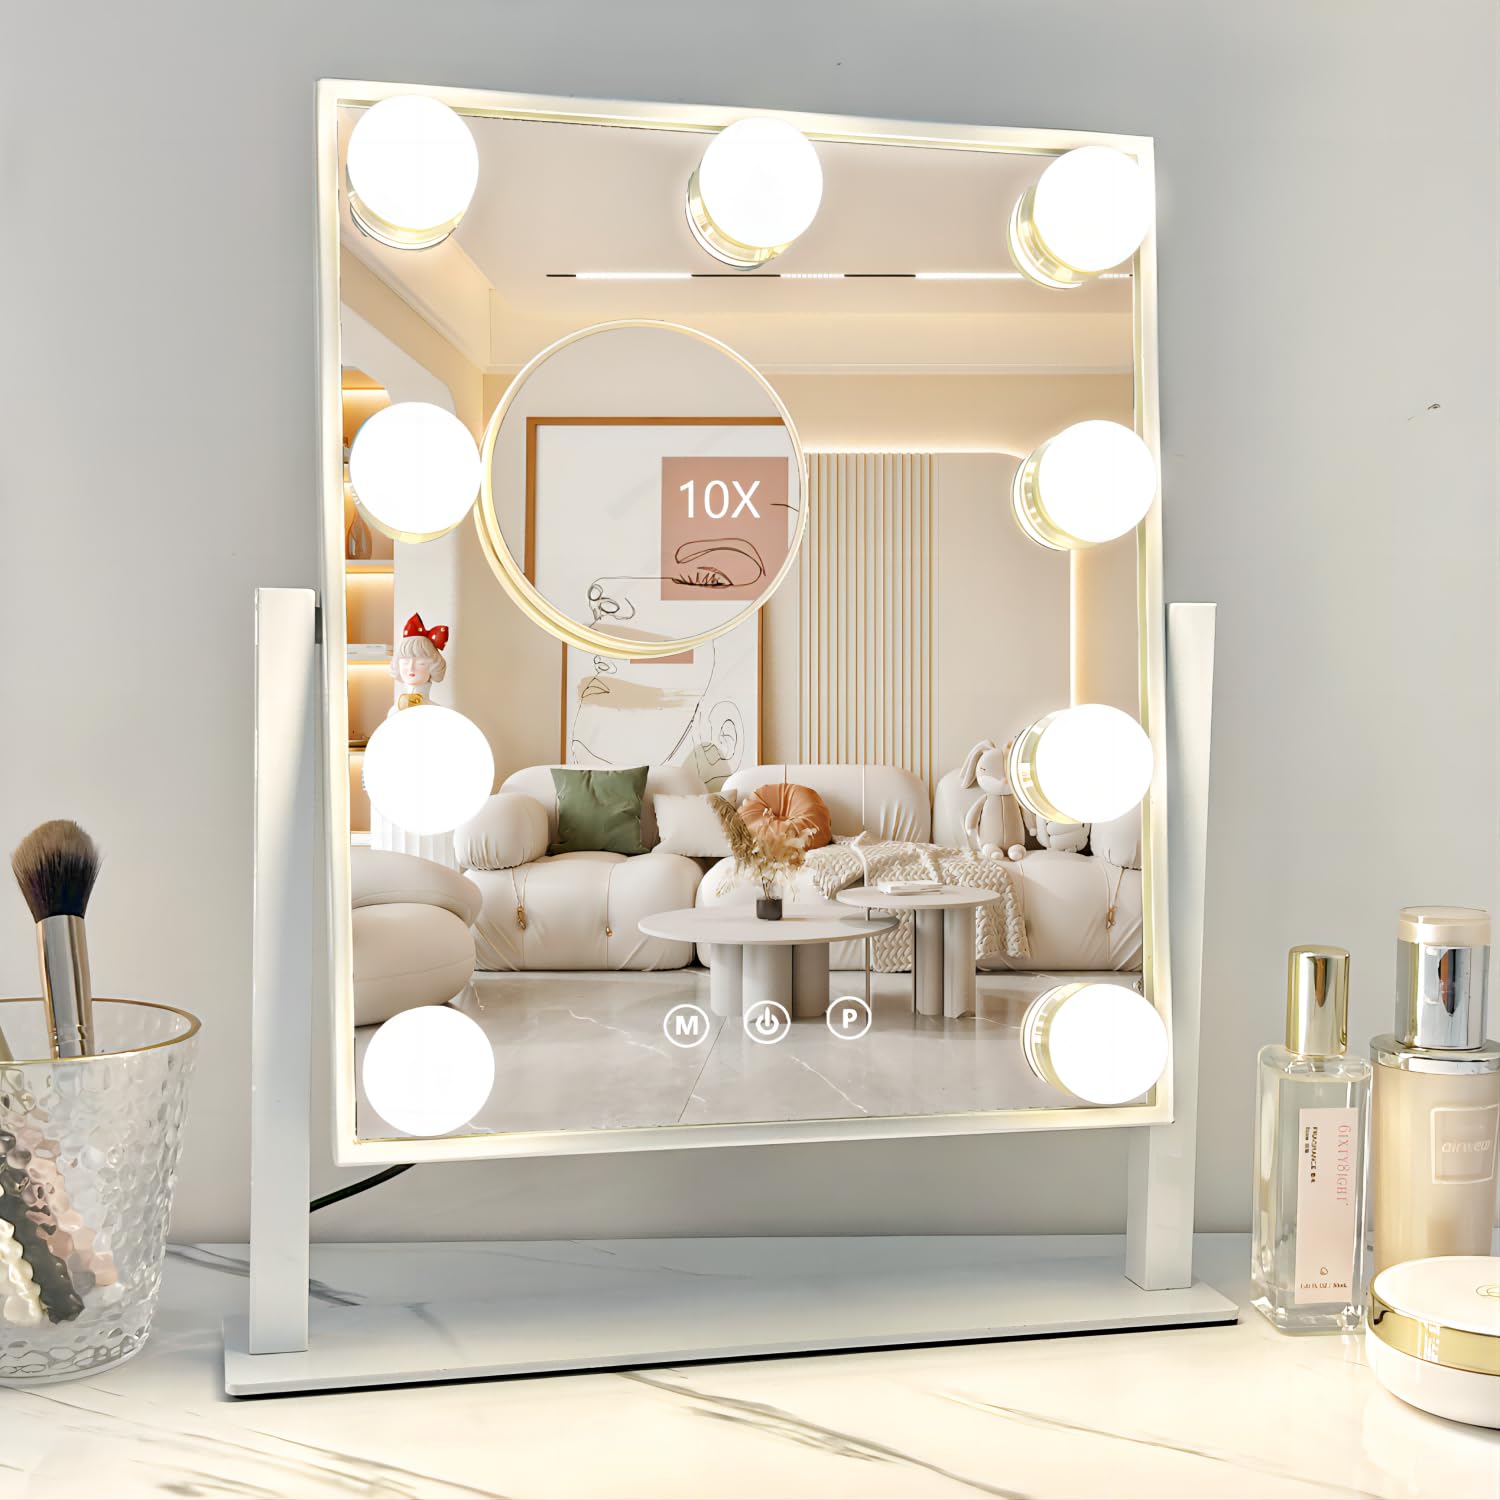 Acoolda Vanity Mirror with Lights, Hollywood Vanity Makeup Mirror with 9 Dimmable LED Bulbs, 3 Color Lighting Modes, Detachable 10X Magnification, 360°Rotation, 12 Inches (White)…